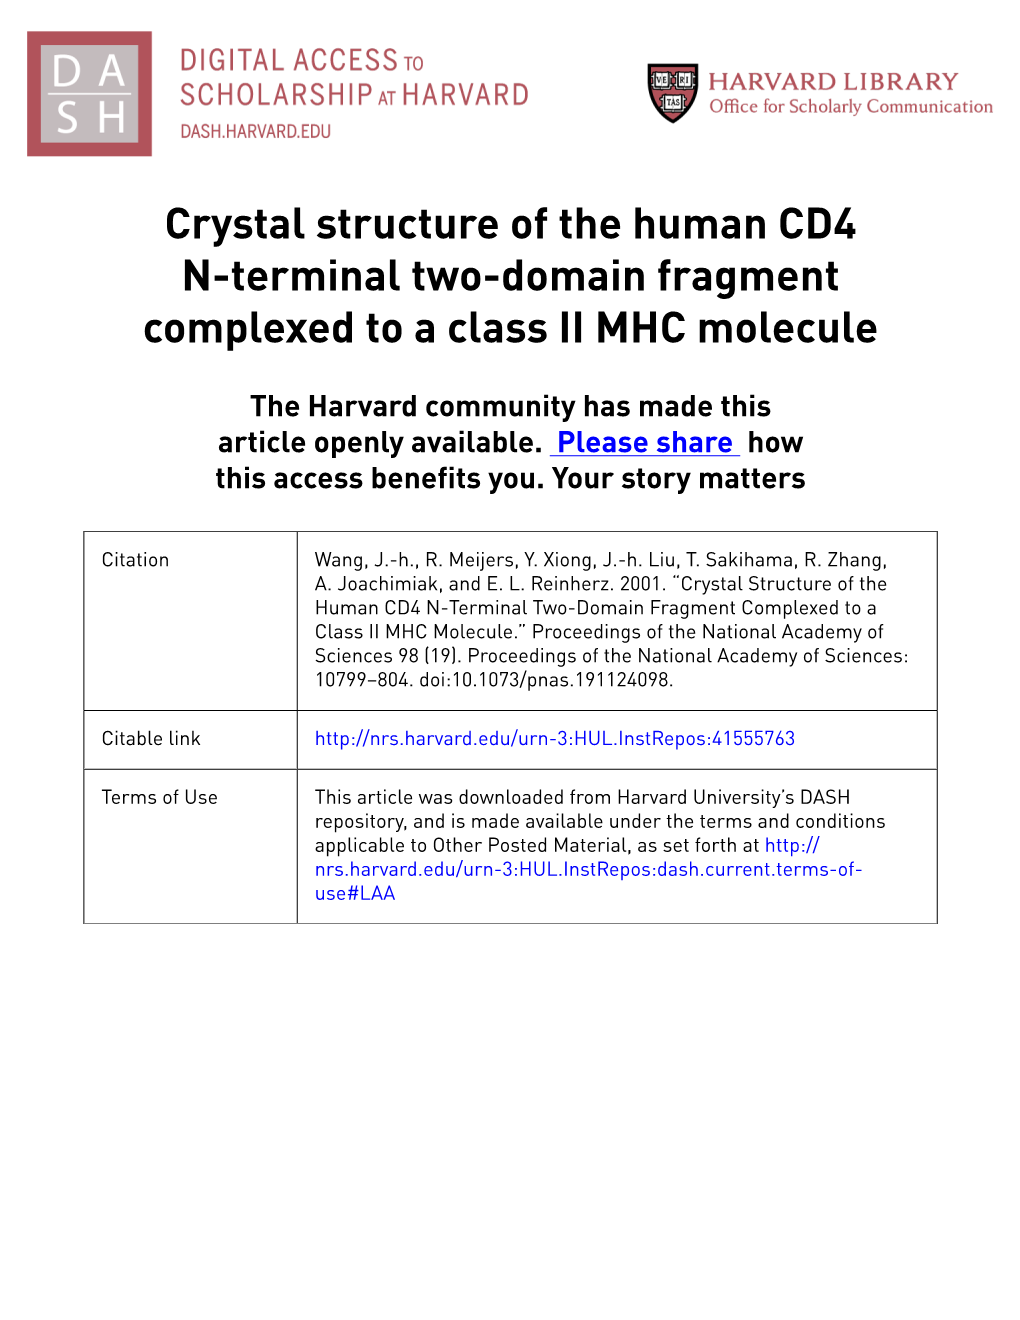 Crystal Structure of the Human CD4 N-Terminal Two-Domain Fragment Complexed to a Class II MHC Molecule